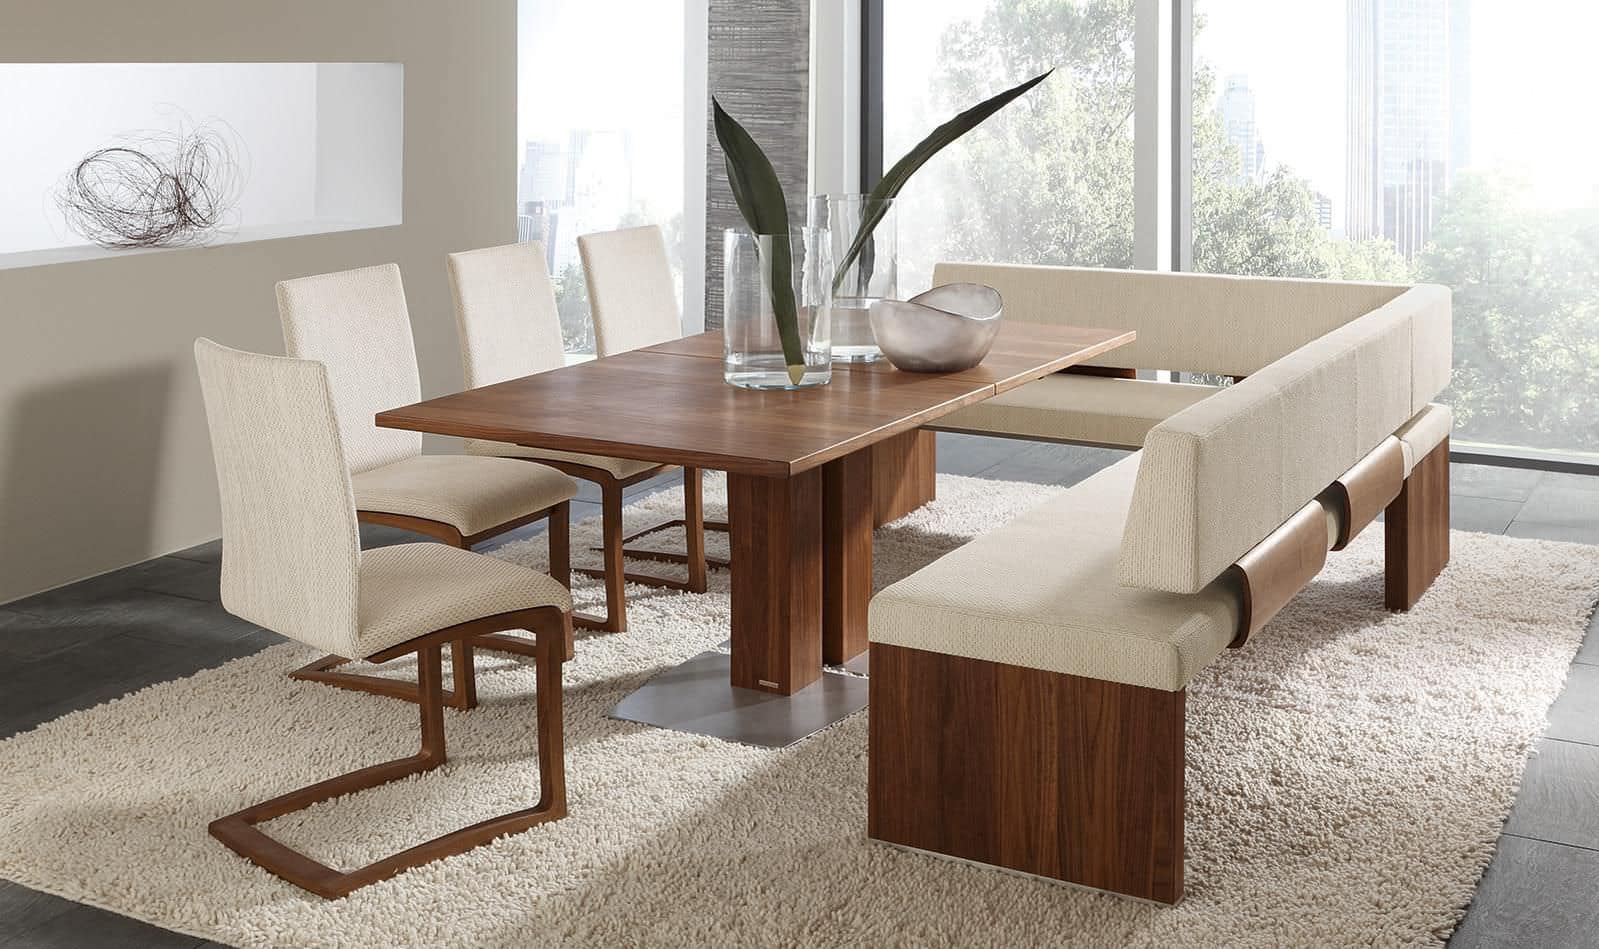 New Modern Wooden Dining Table Designs - The Architecture Designs